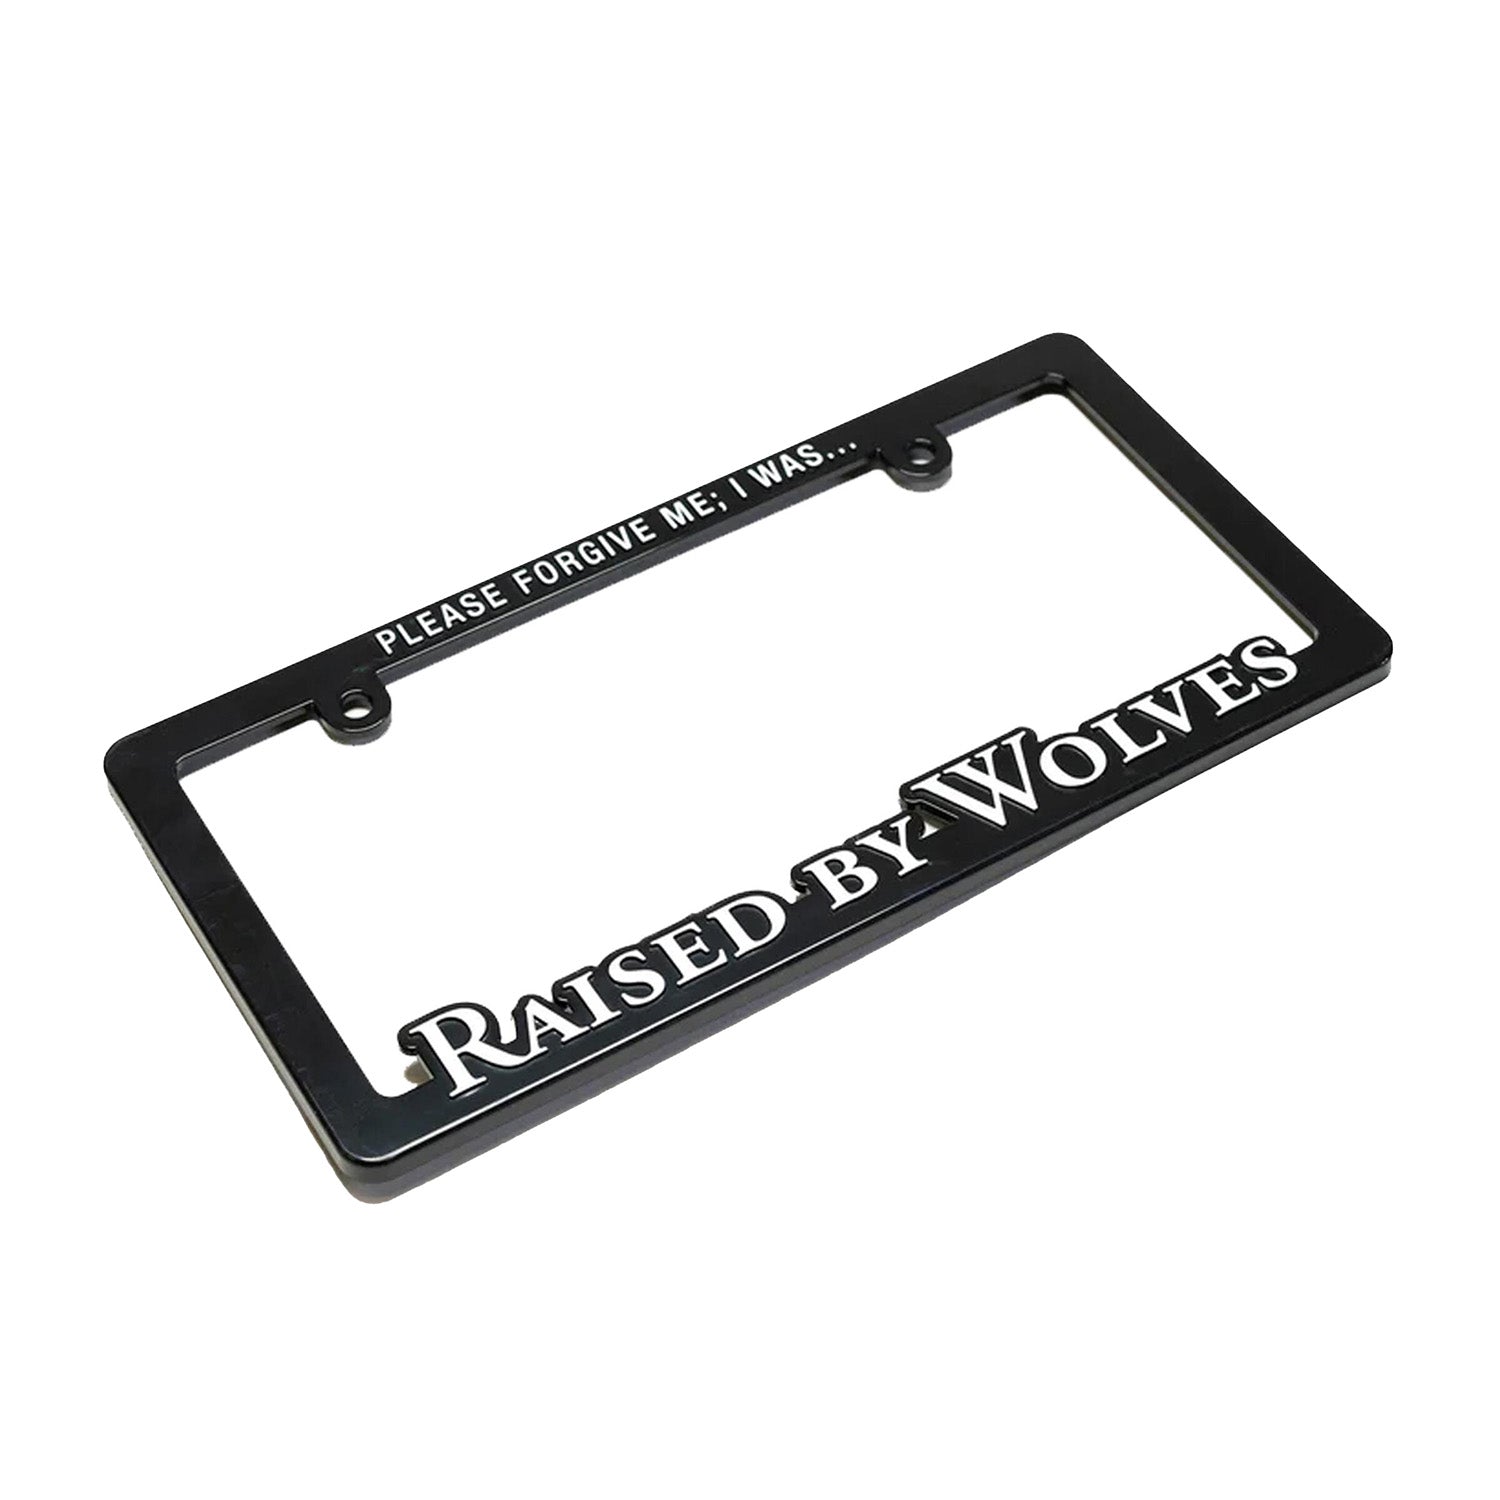 Raised By Wolves License Plate Frame 6x12 Black - ACCESSORIES - Canada